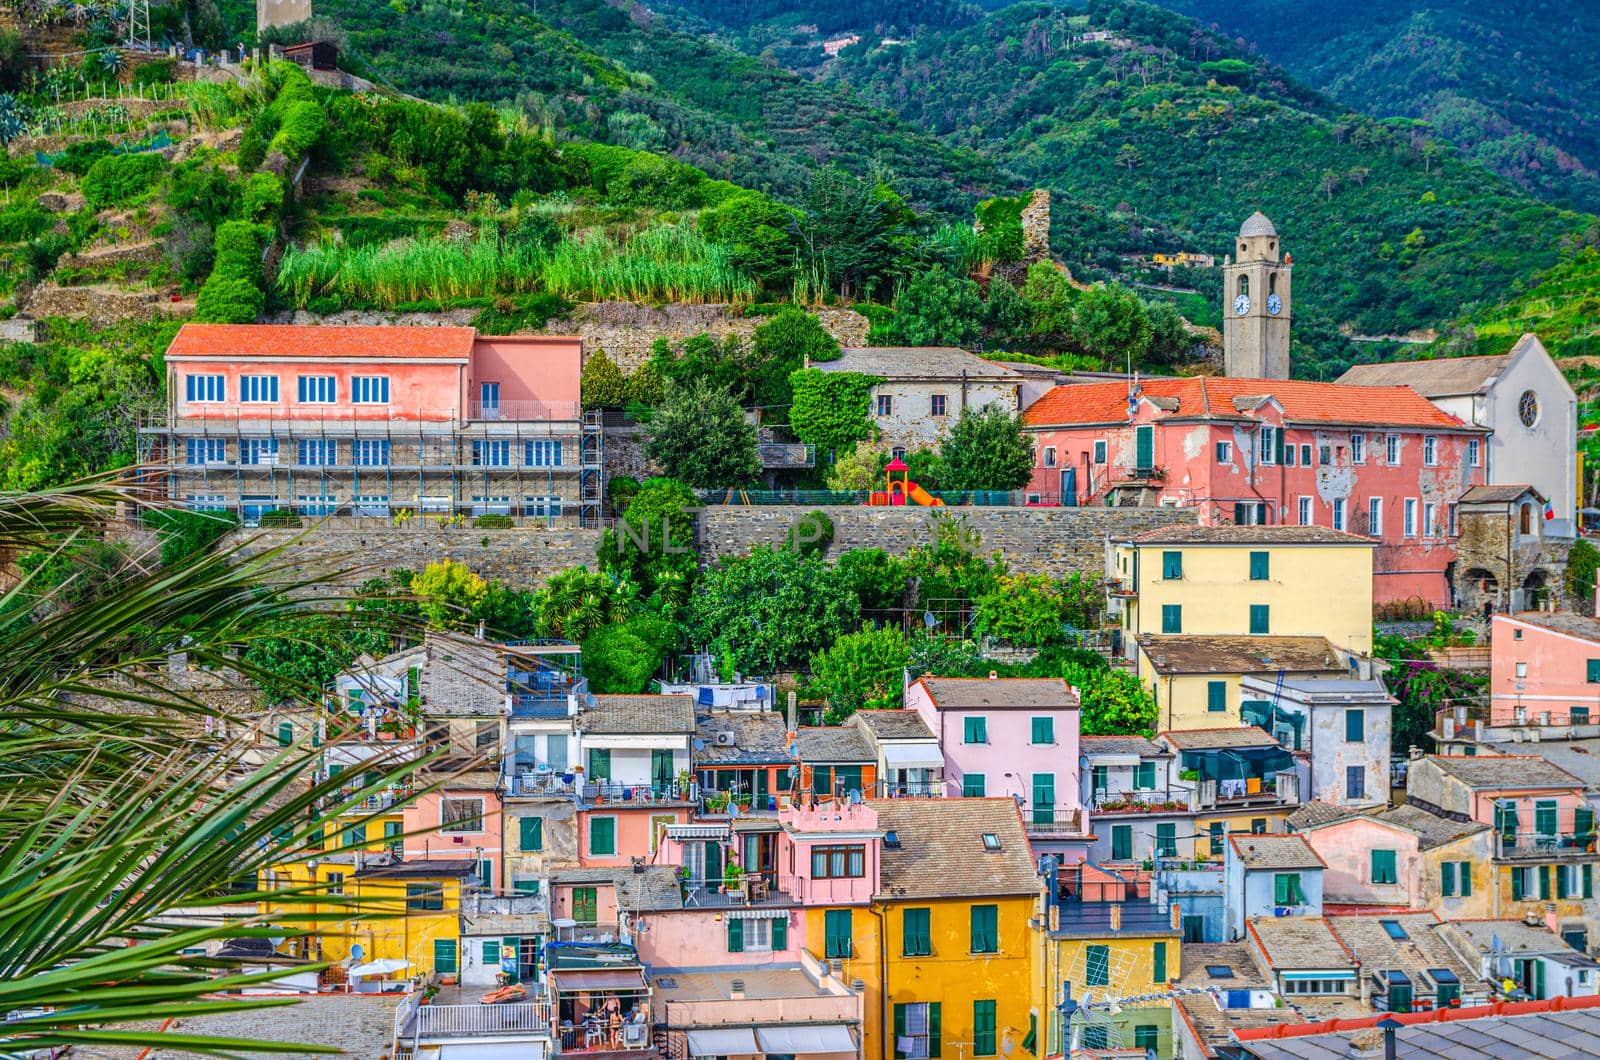 Top aerial view of green forest hills and typical colorful buildings houses in Vernazza village, National park Cinque Terre, La Spezia, Liguria, Italy